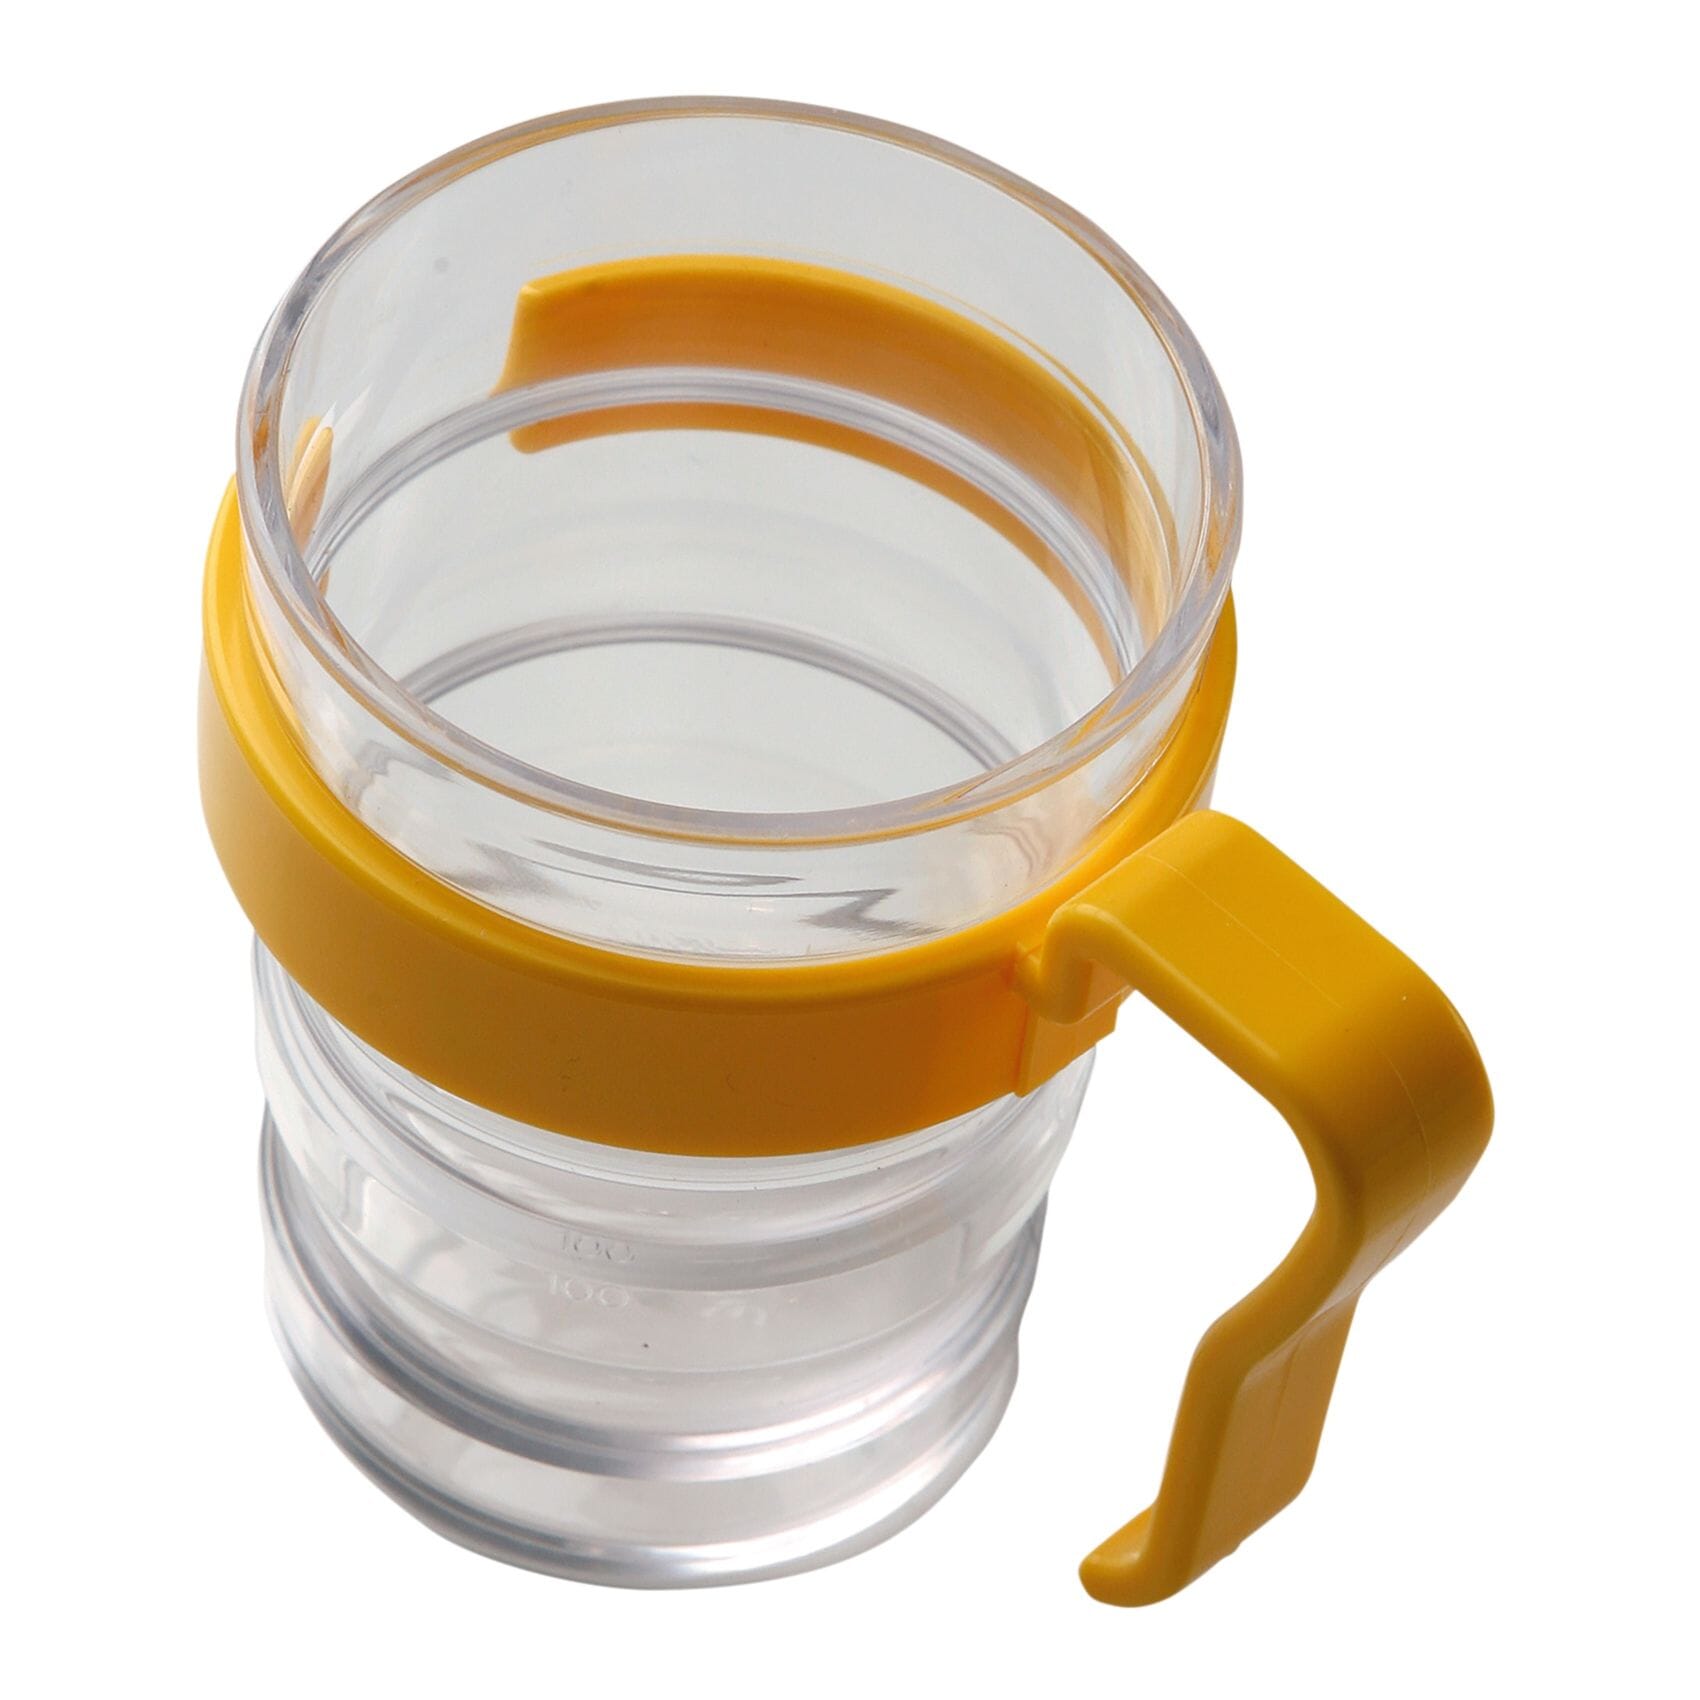 View Handle for Novo Cup and Sure Grip Mug information